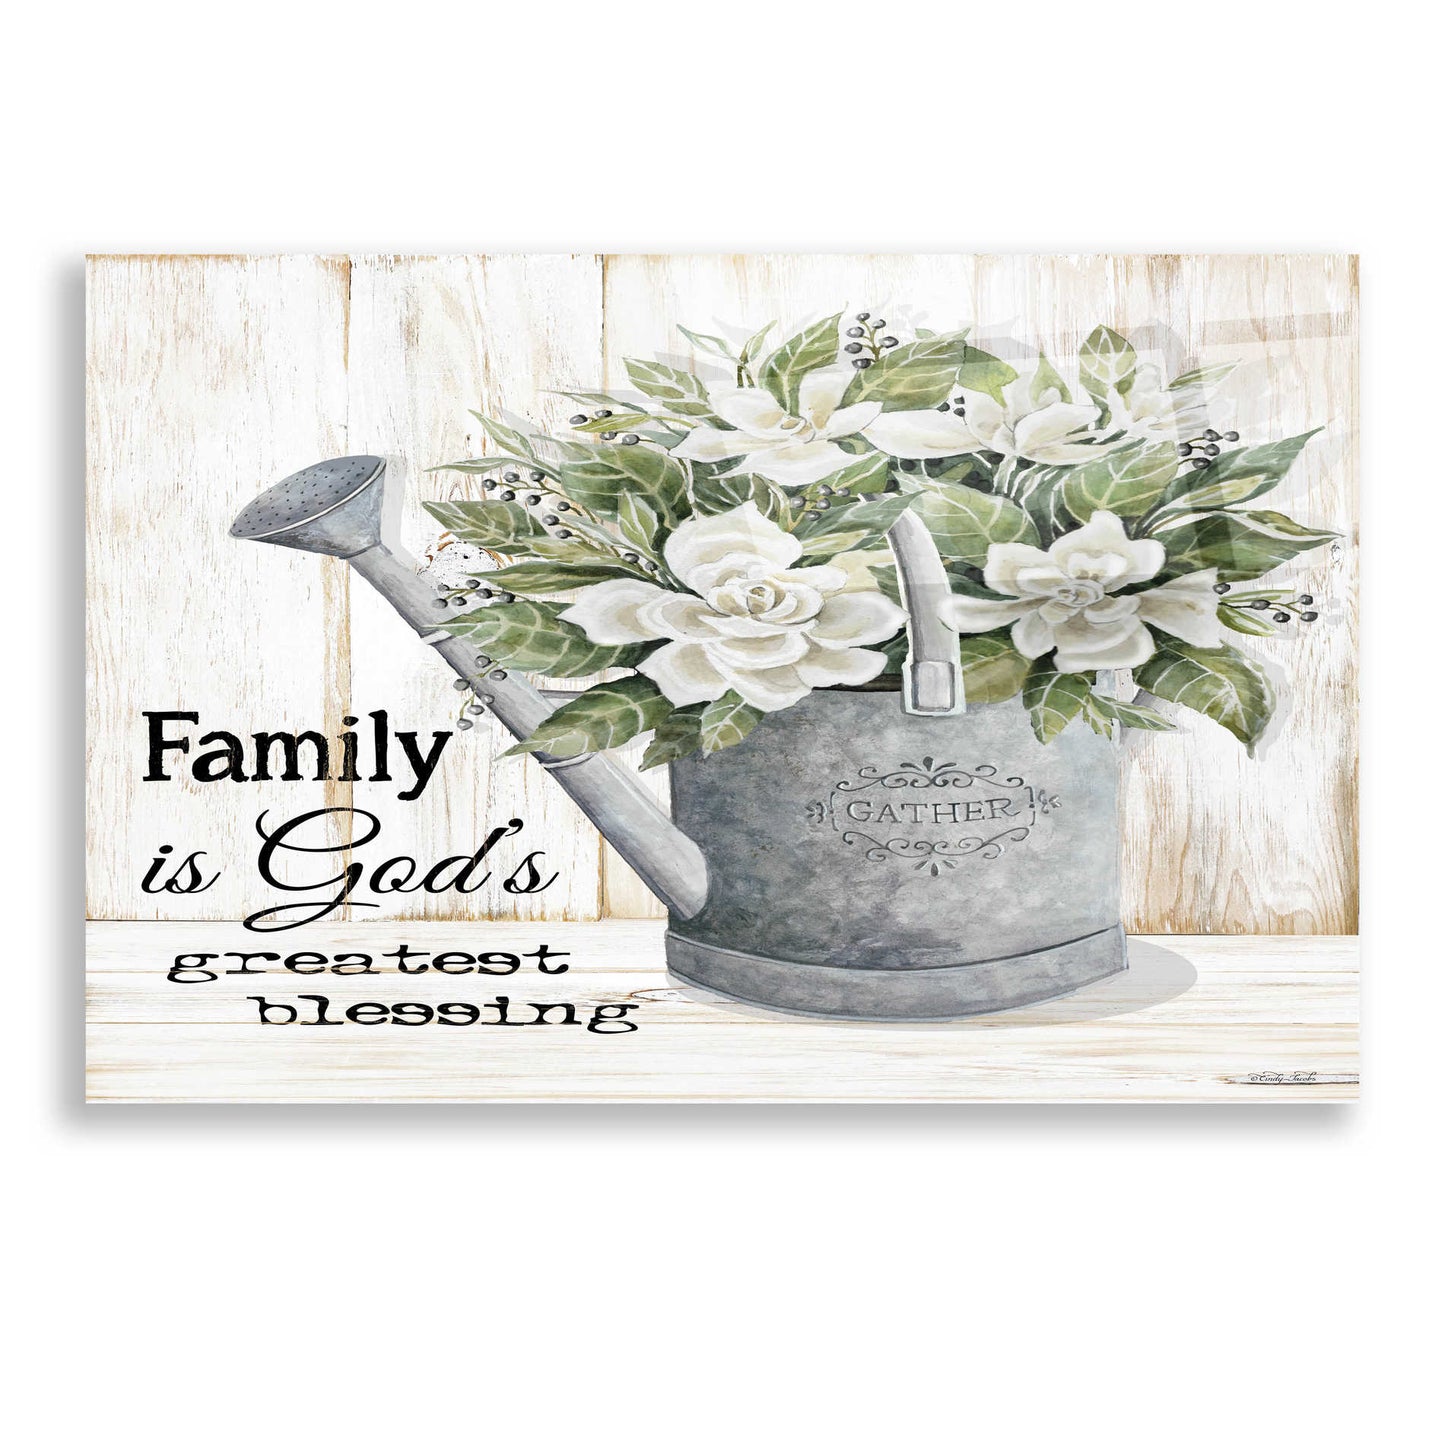 Epic Art 'Family is God's Greatest Blessing' by Cindy Jacobs, Acrylic Glass Wall Art,24x16